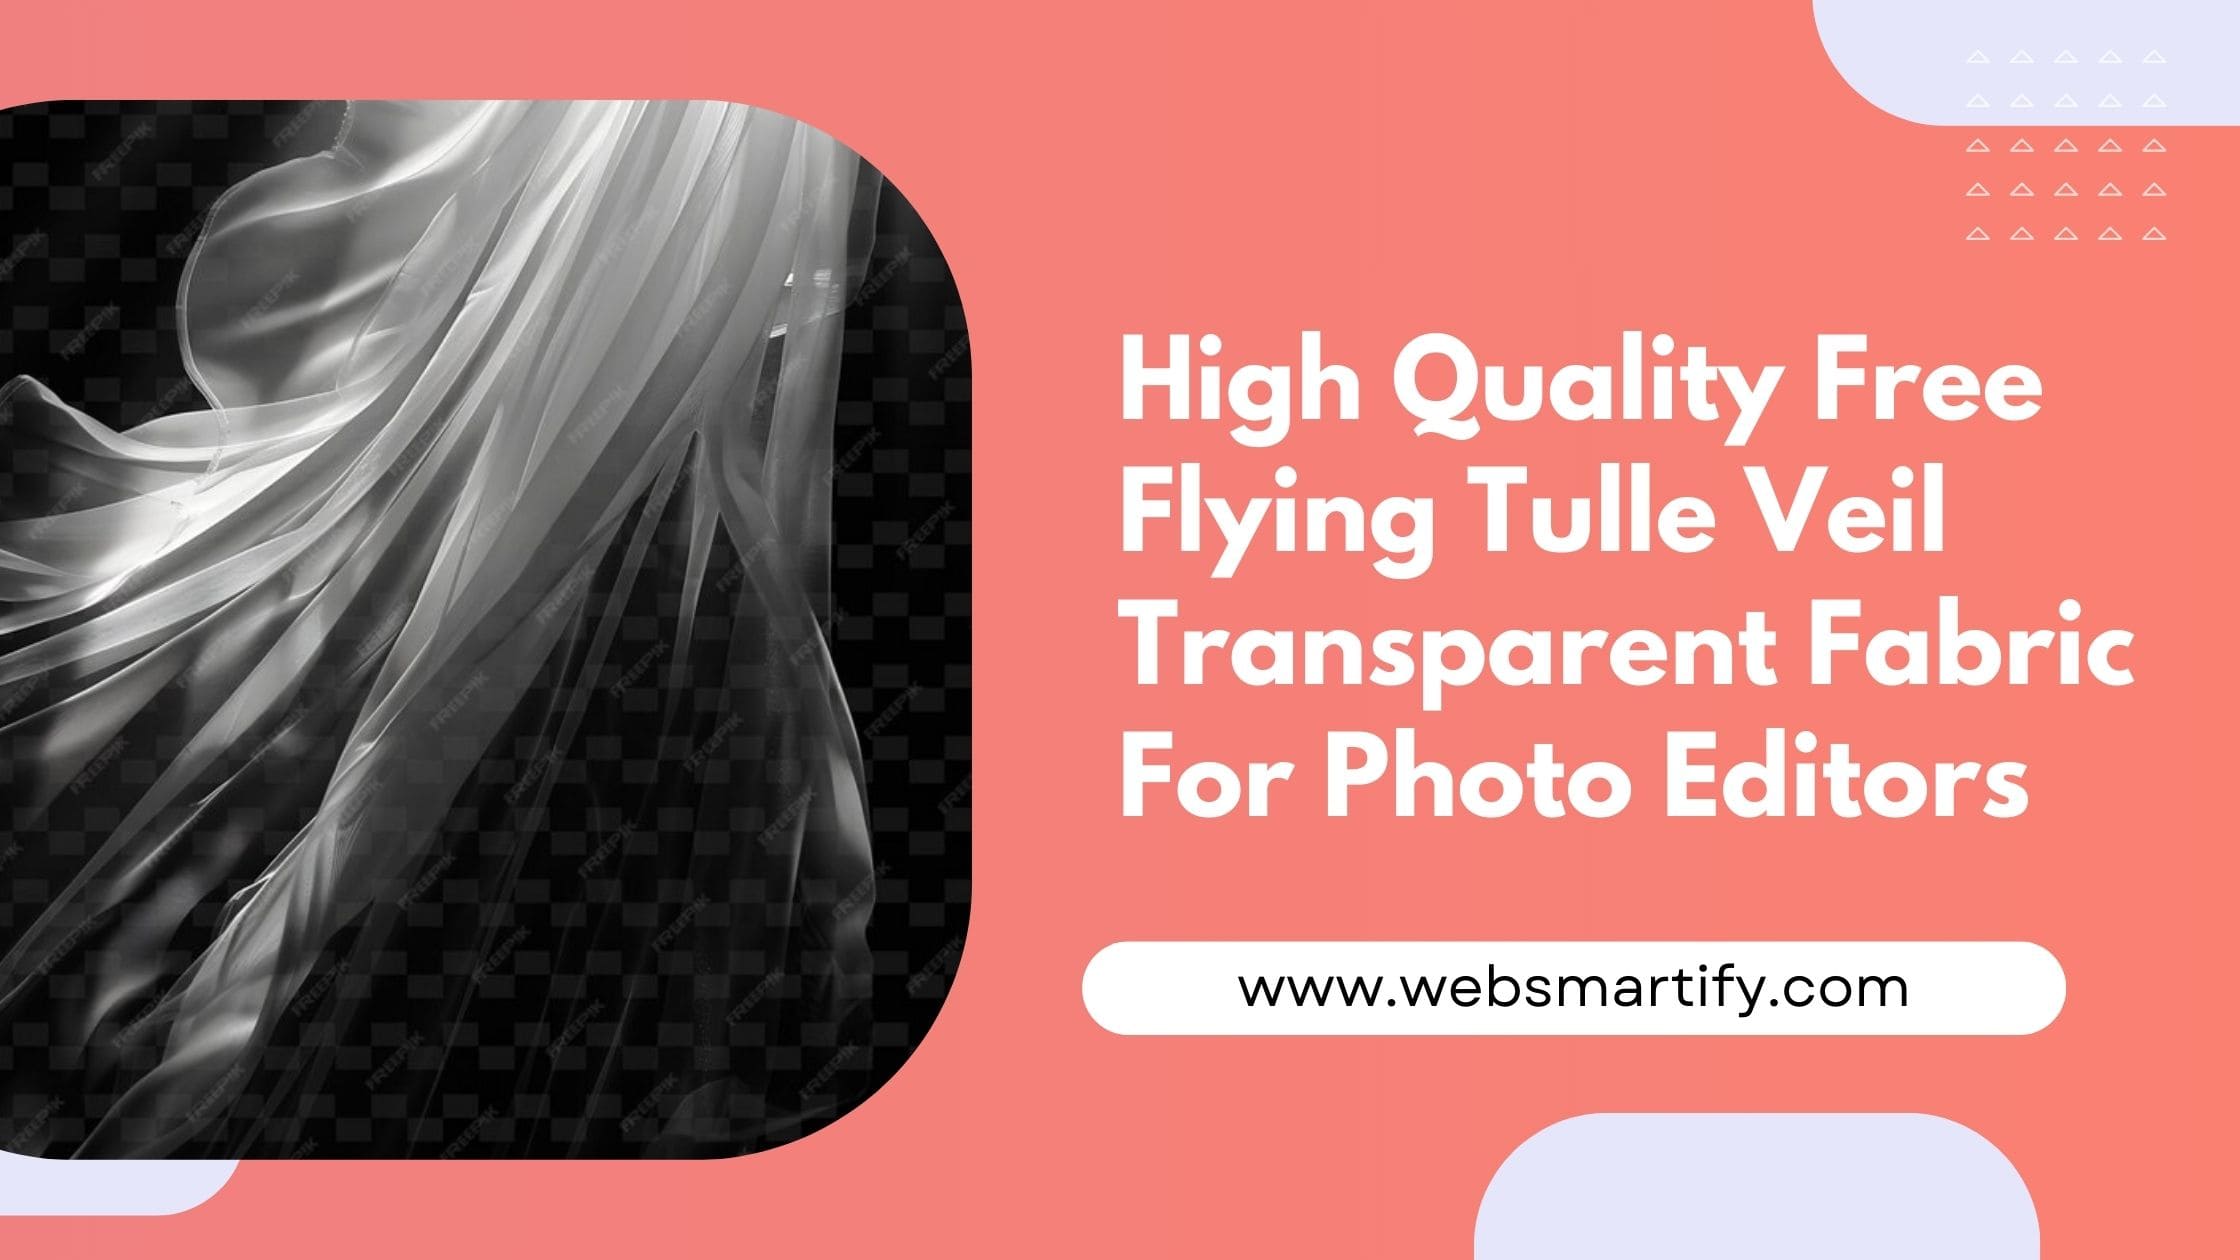 Enhance your photo edits with flying tulle veil transparent fabric PNGs - Websmartify